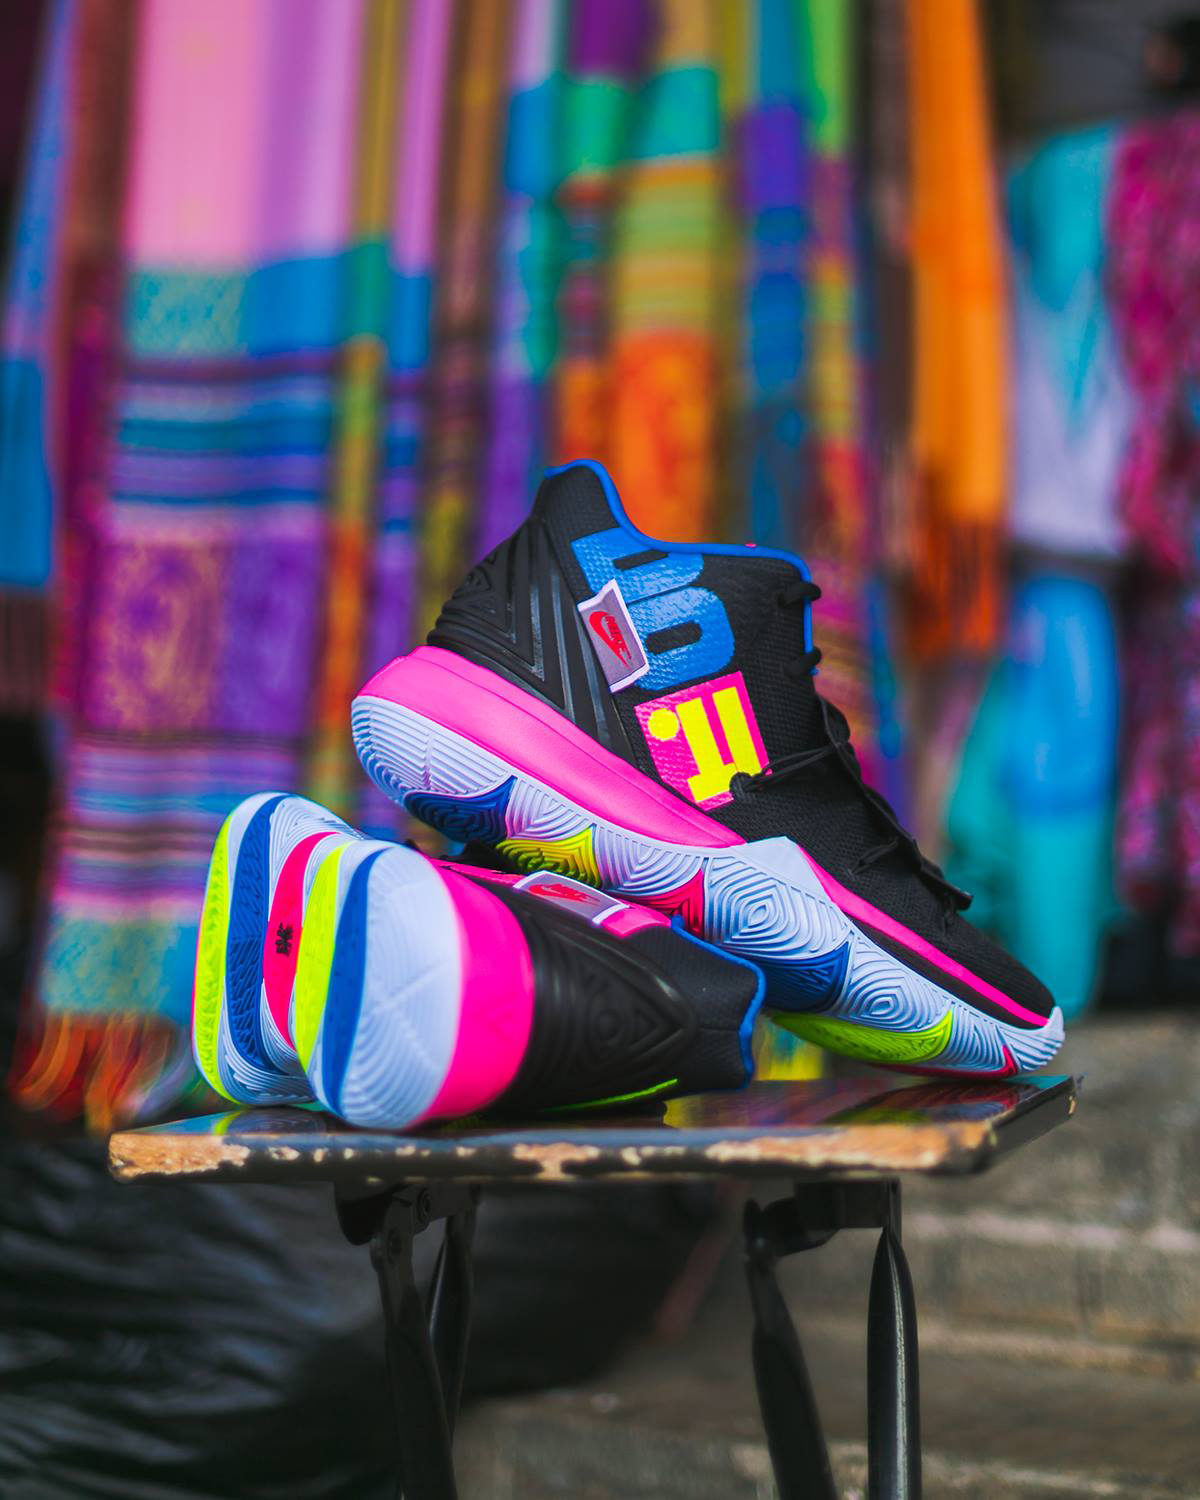 Nike Kyrie 5 Just Do It Where to Buy | SneakerFits.com